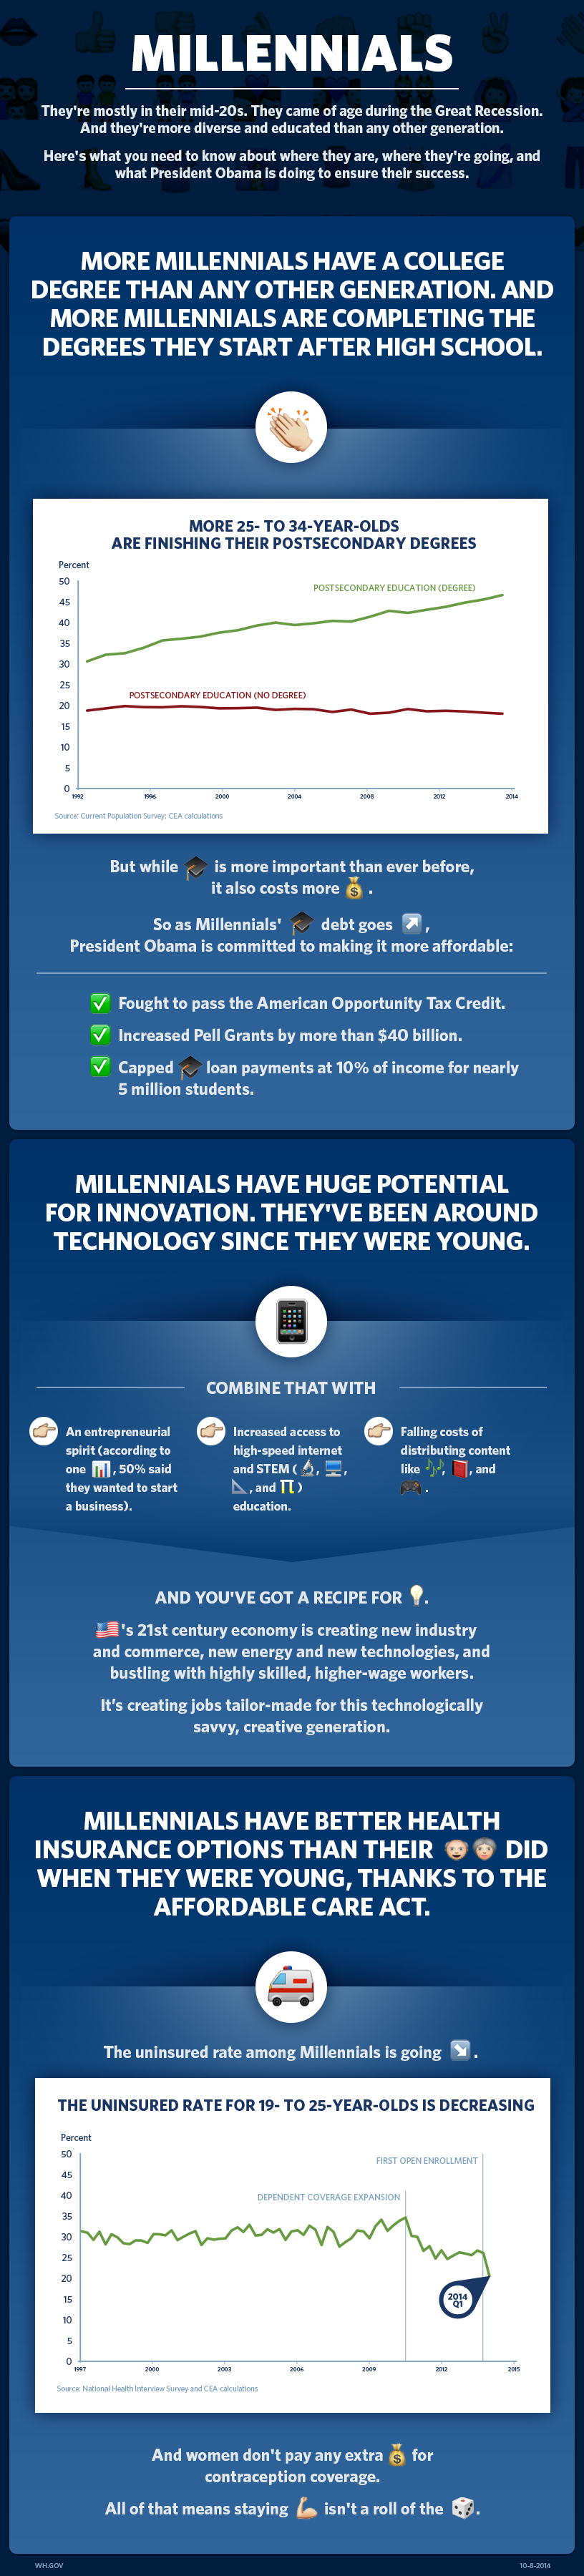 Here's what you need to know about Millennials.